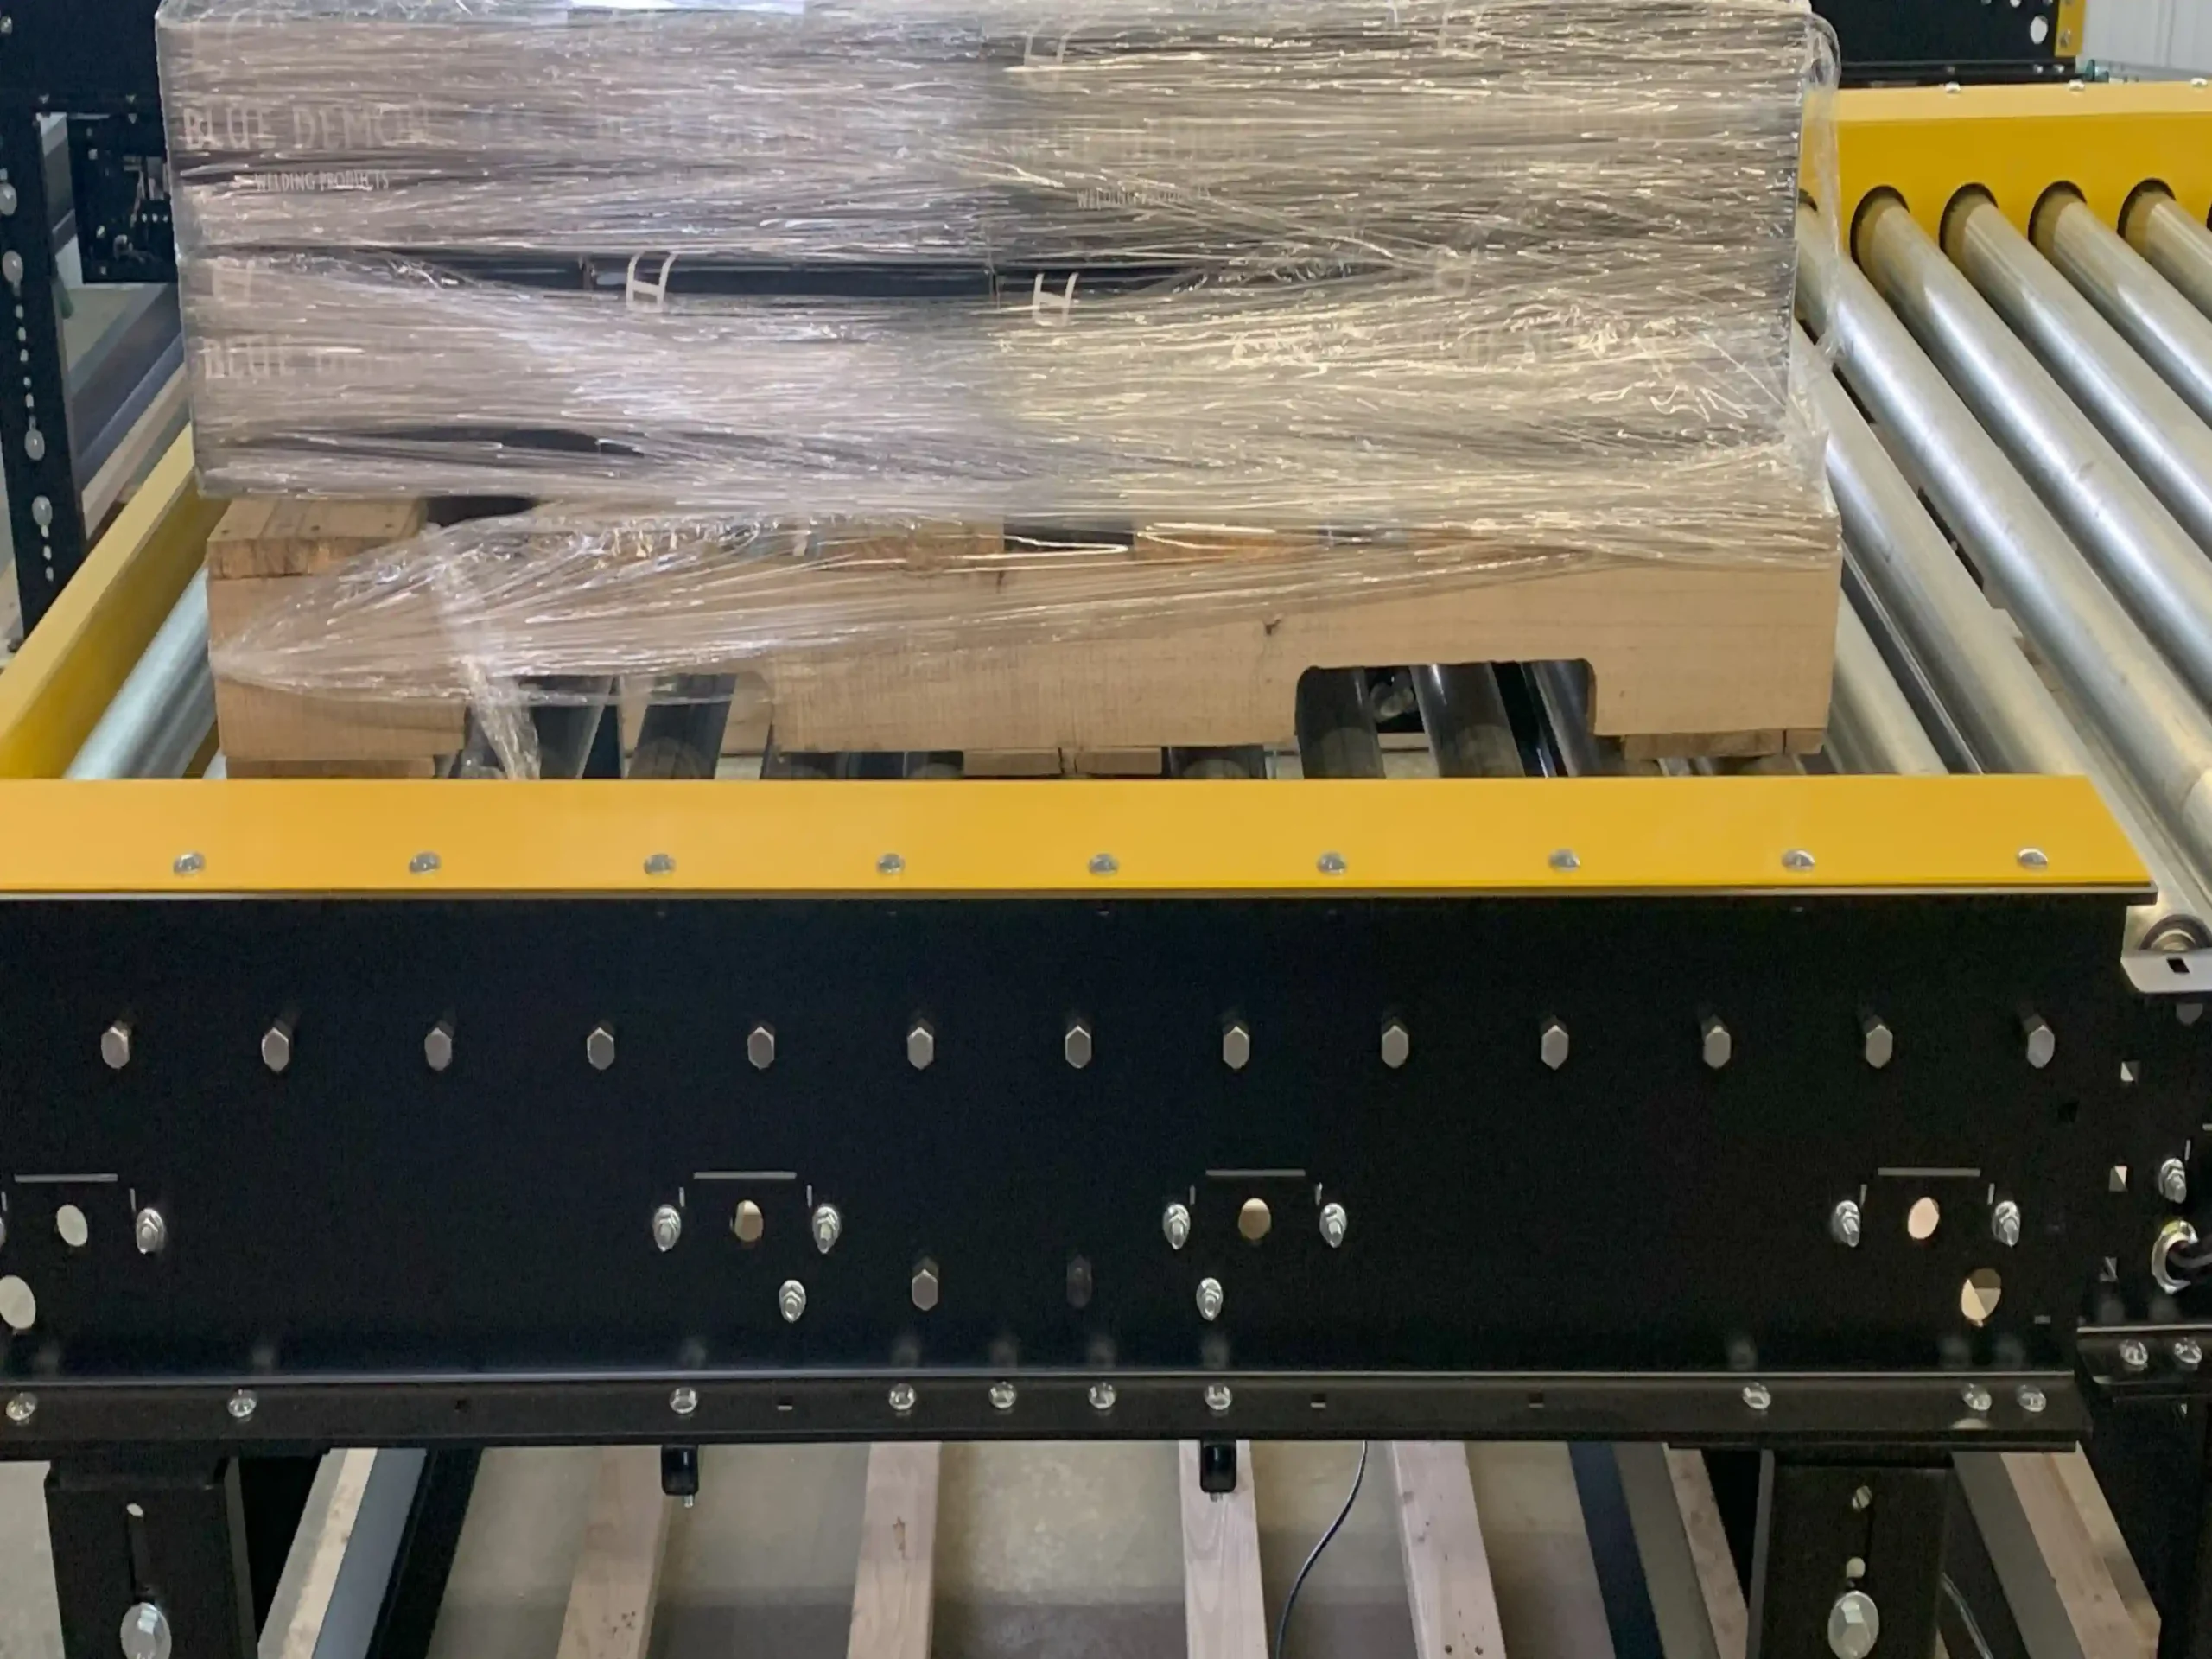 Three pallets stacked on top a pallet conveyor.